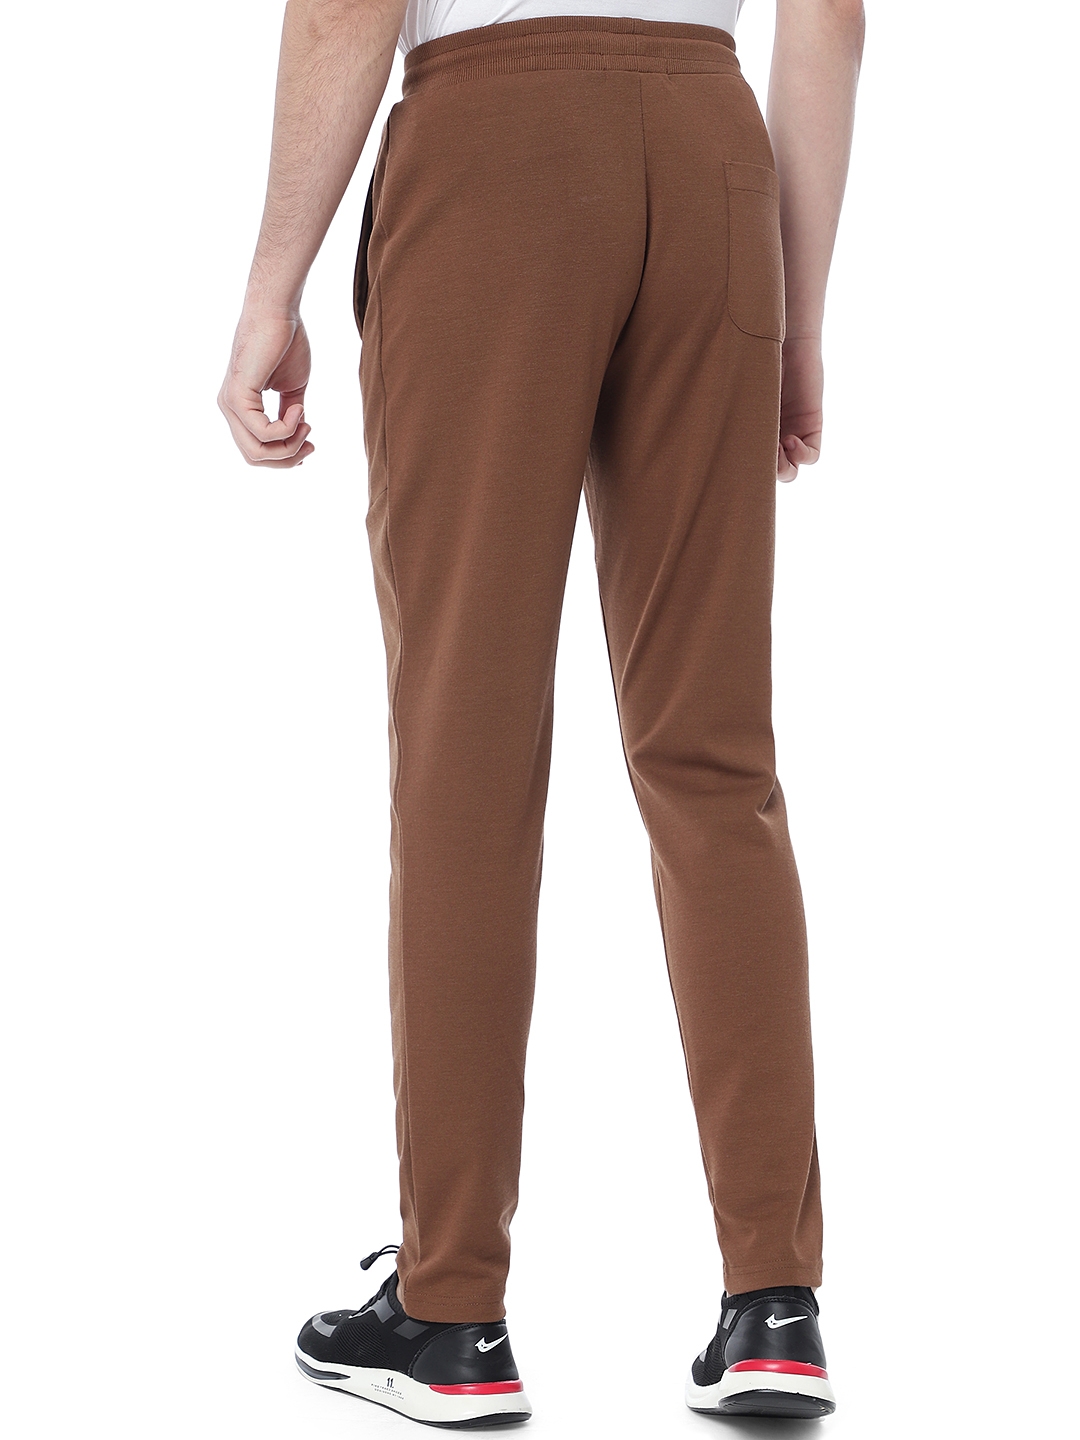 Greenfibre | Coffee Brown Solid Slim Fit Track Pant | Greenfibre 2